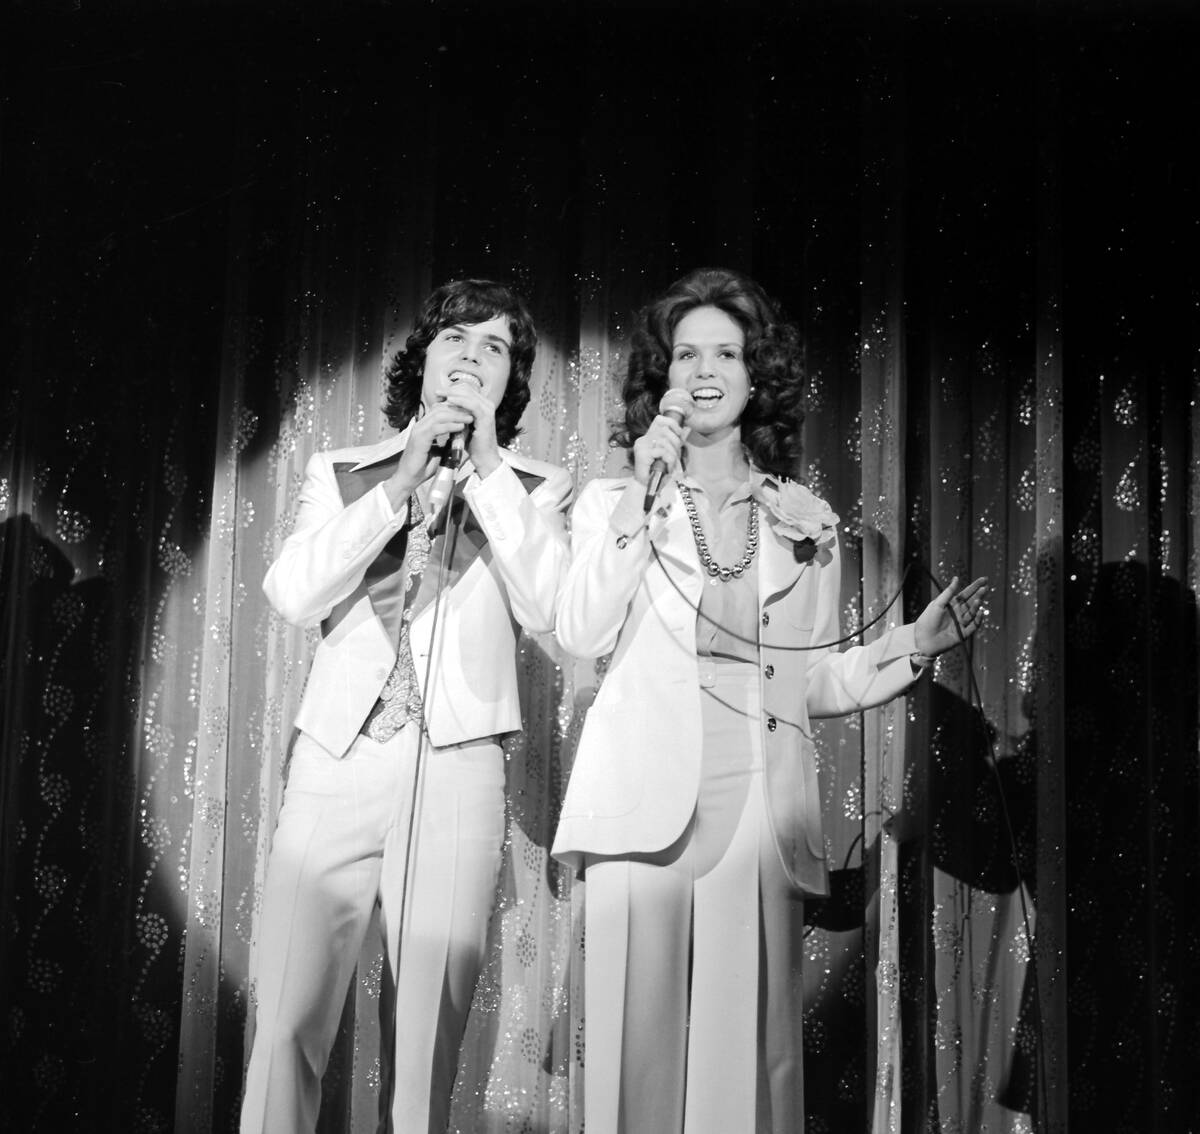 The Osmonds at the Tropicana on Sept. 13, 1974. (Las Vegas Review-Journal file photo)